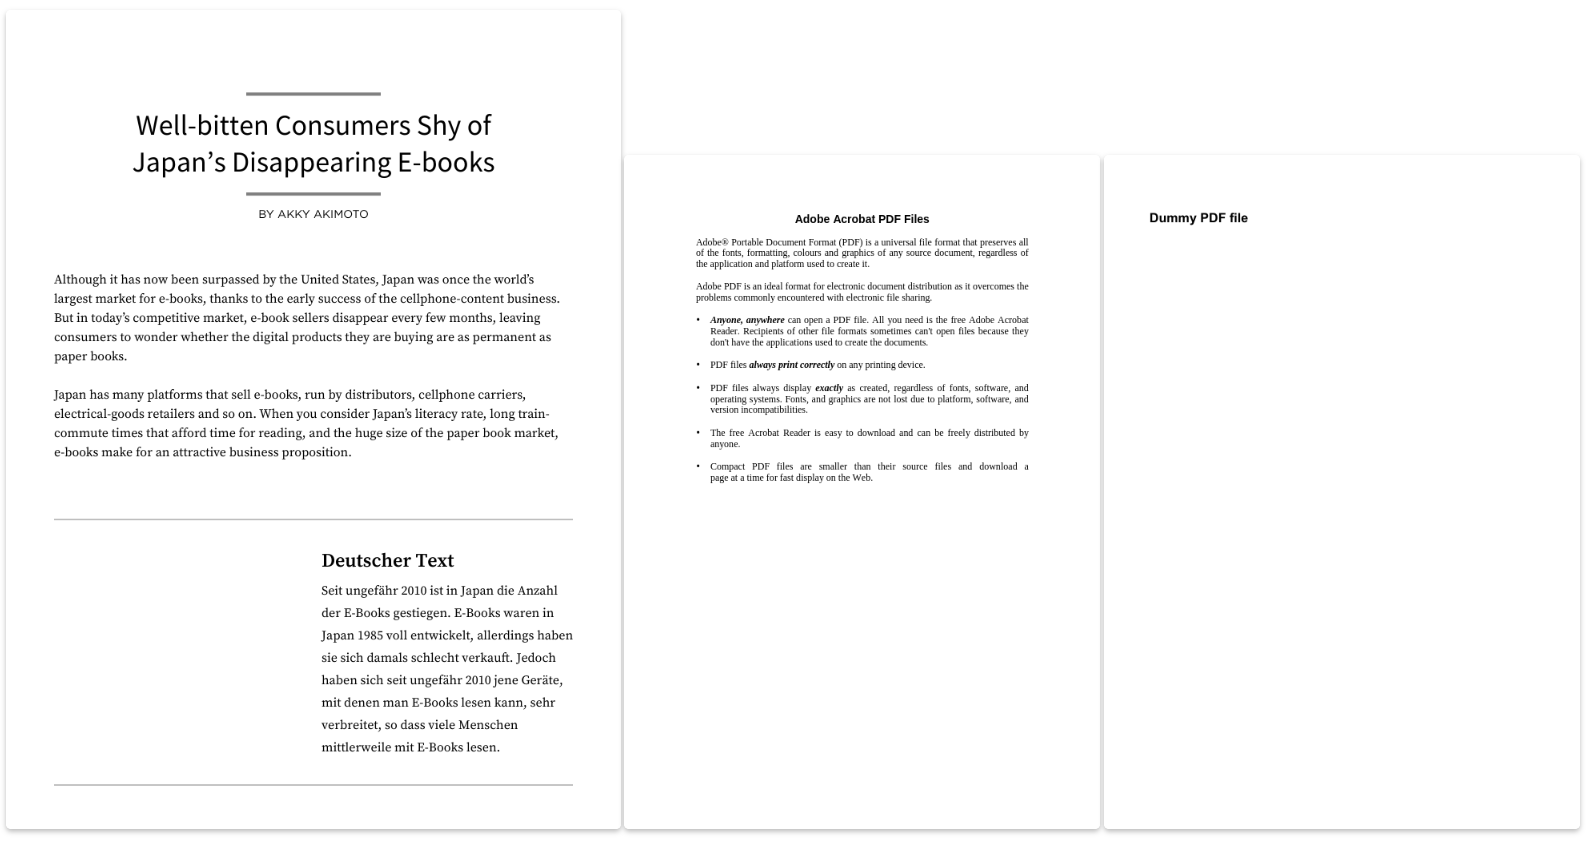 Displaying three PDFs side by side